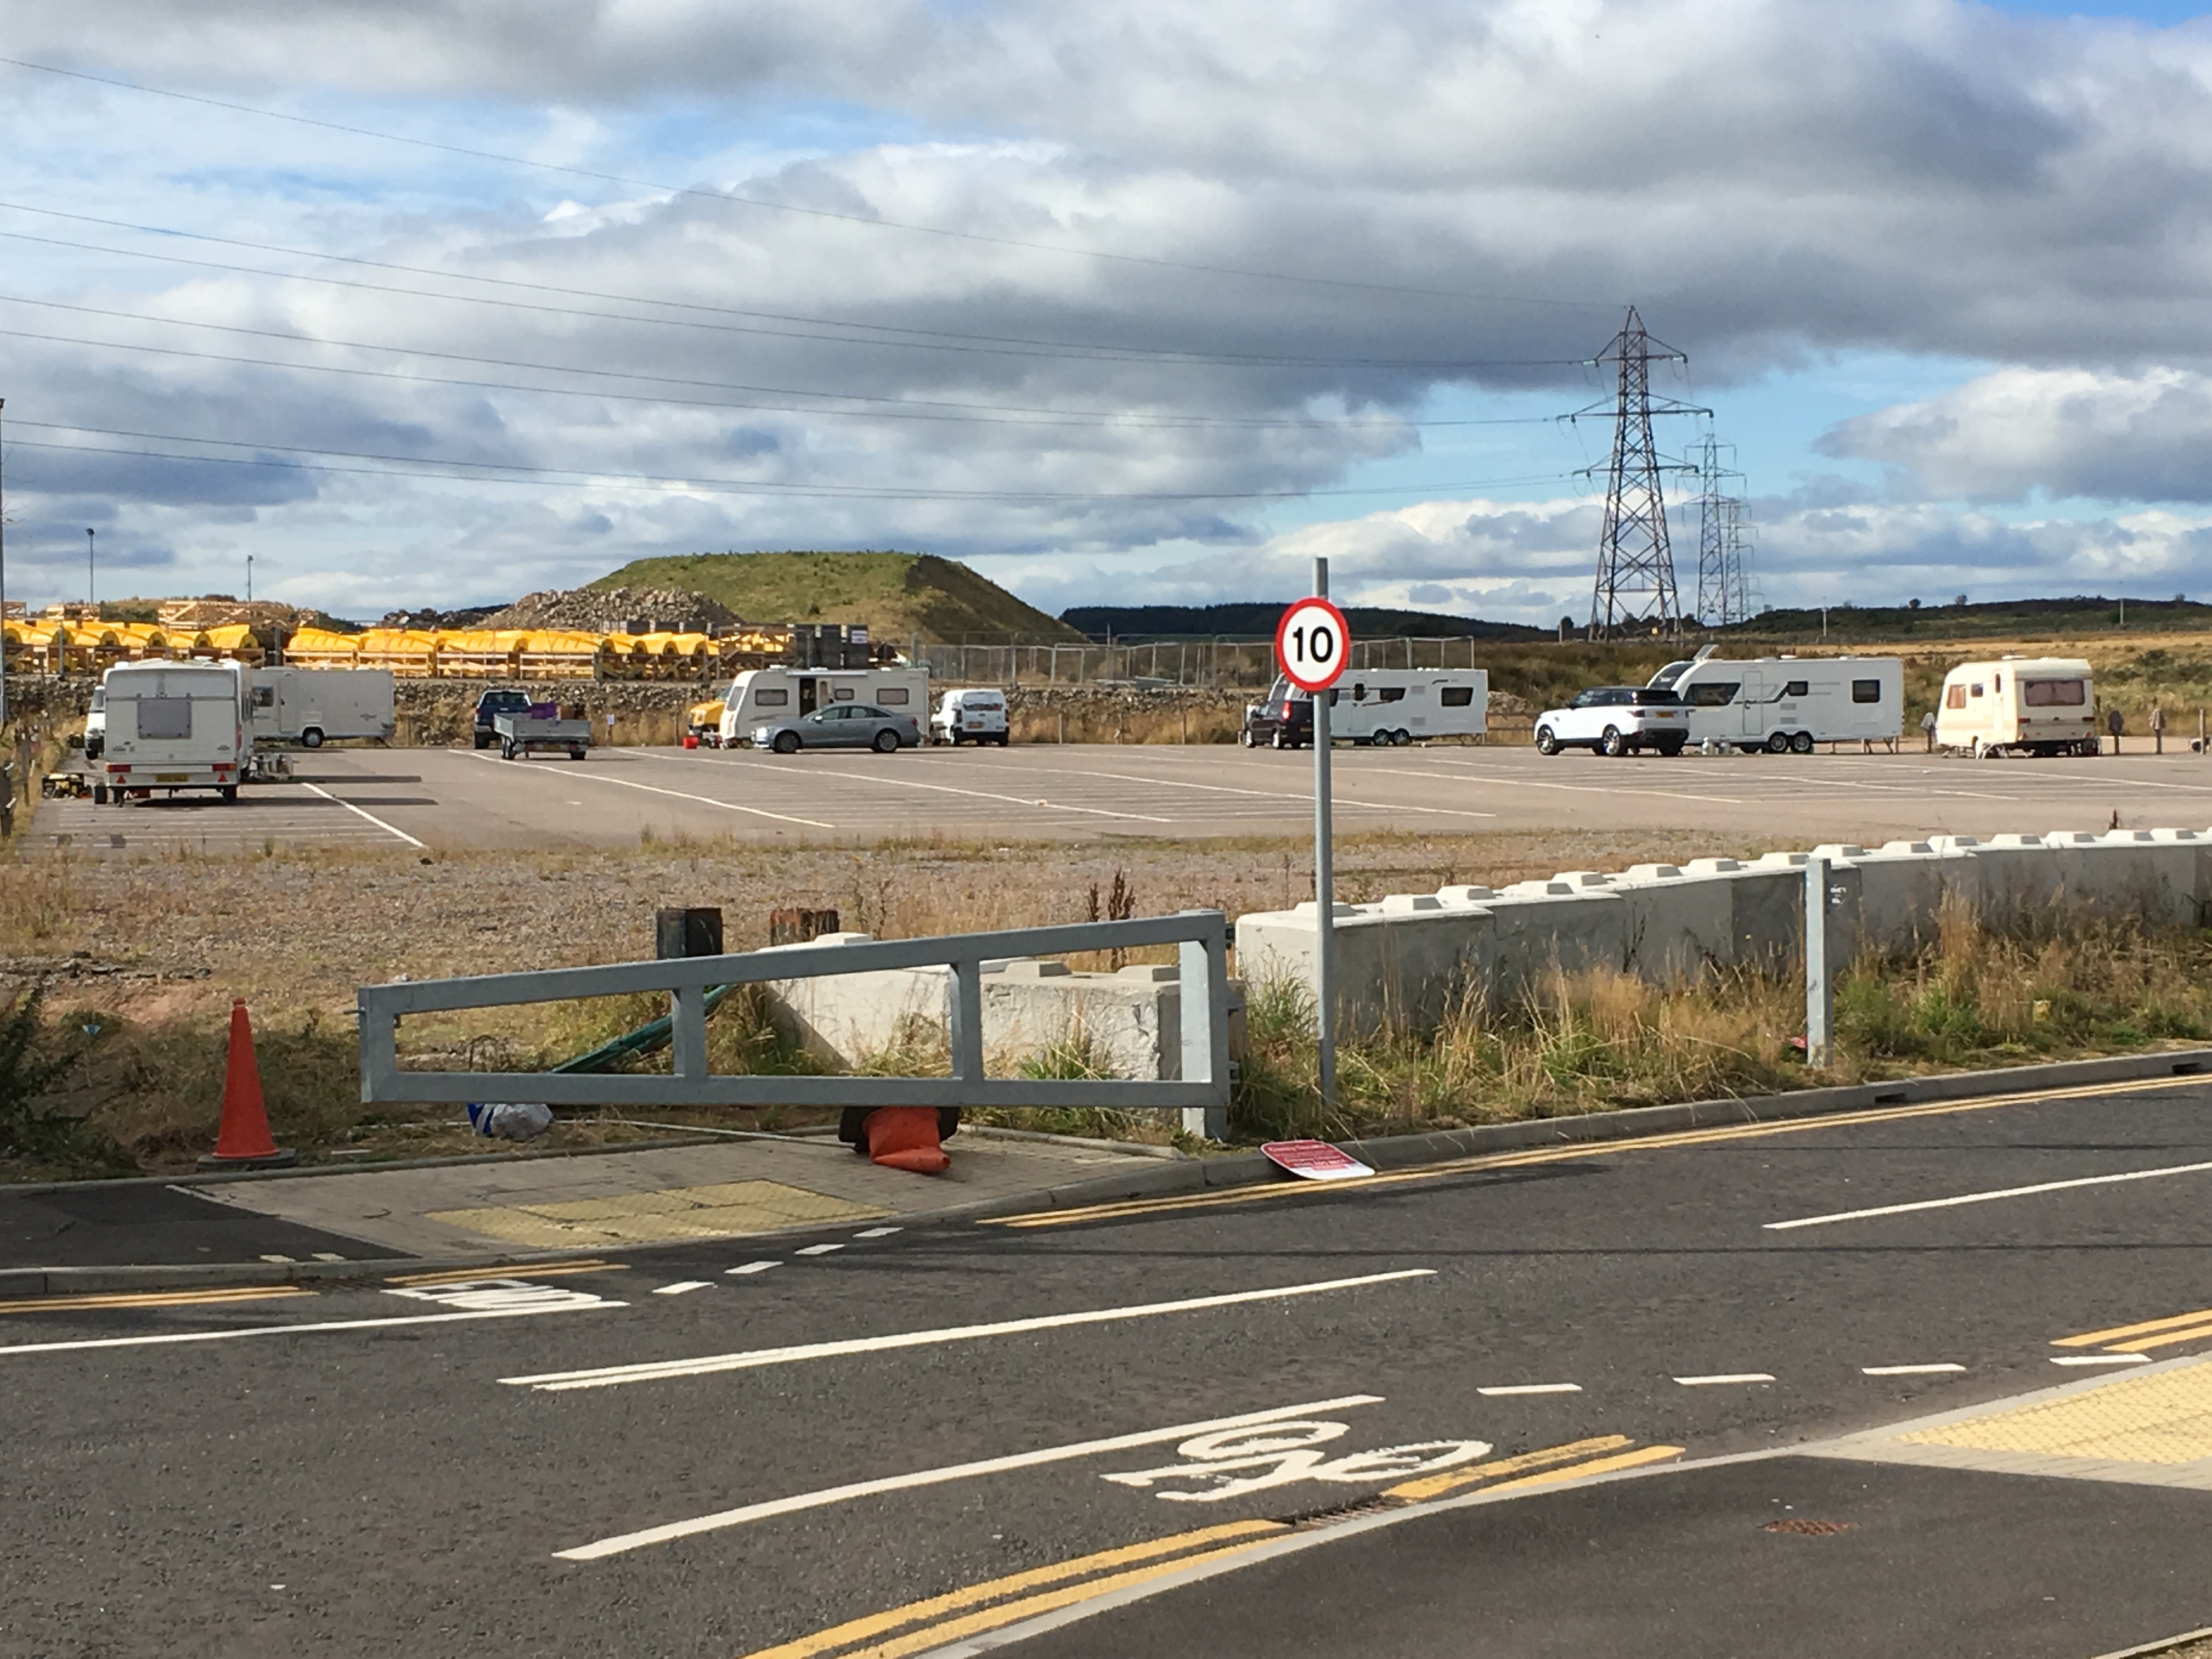 Travellers pitched up near Lochside Academy